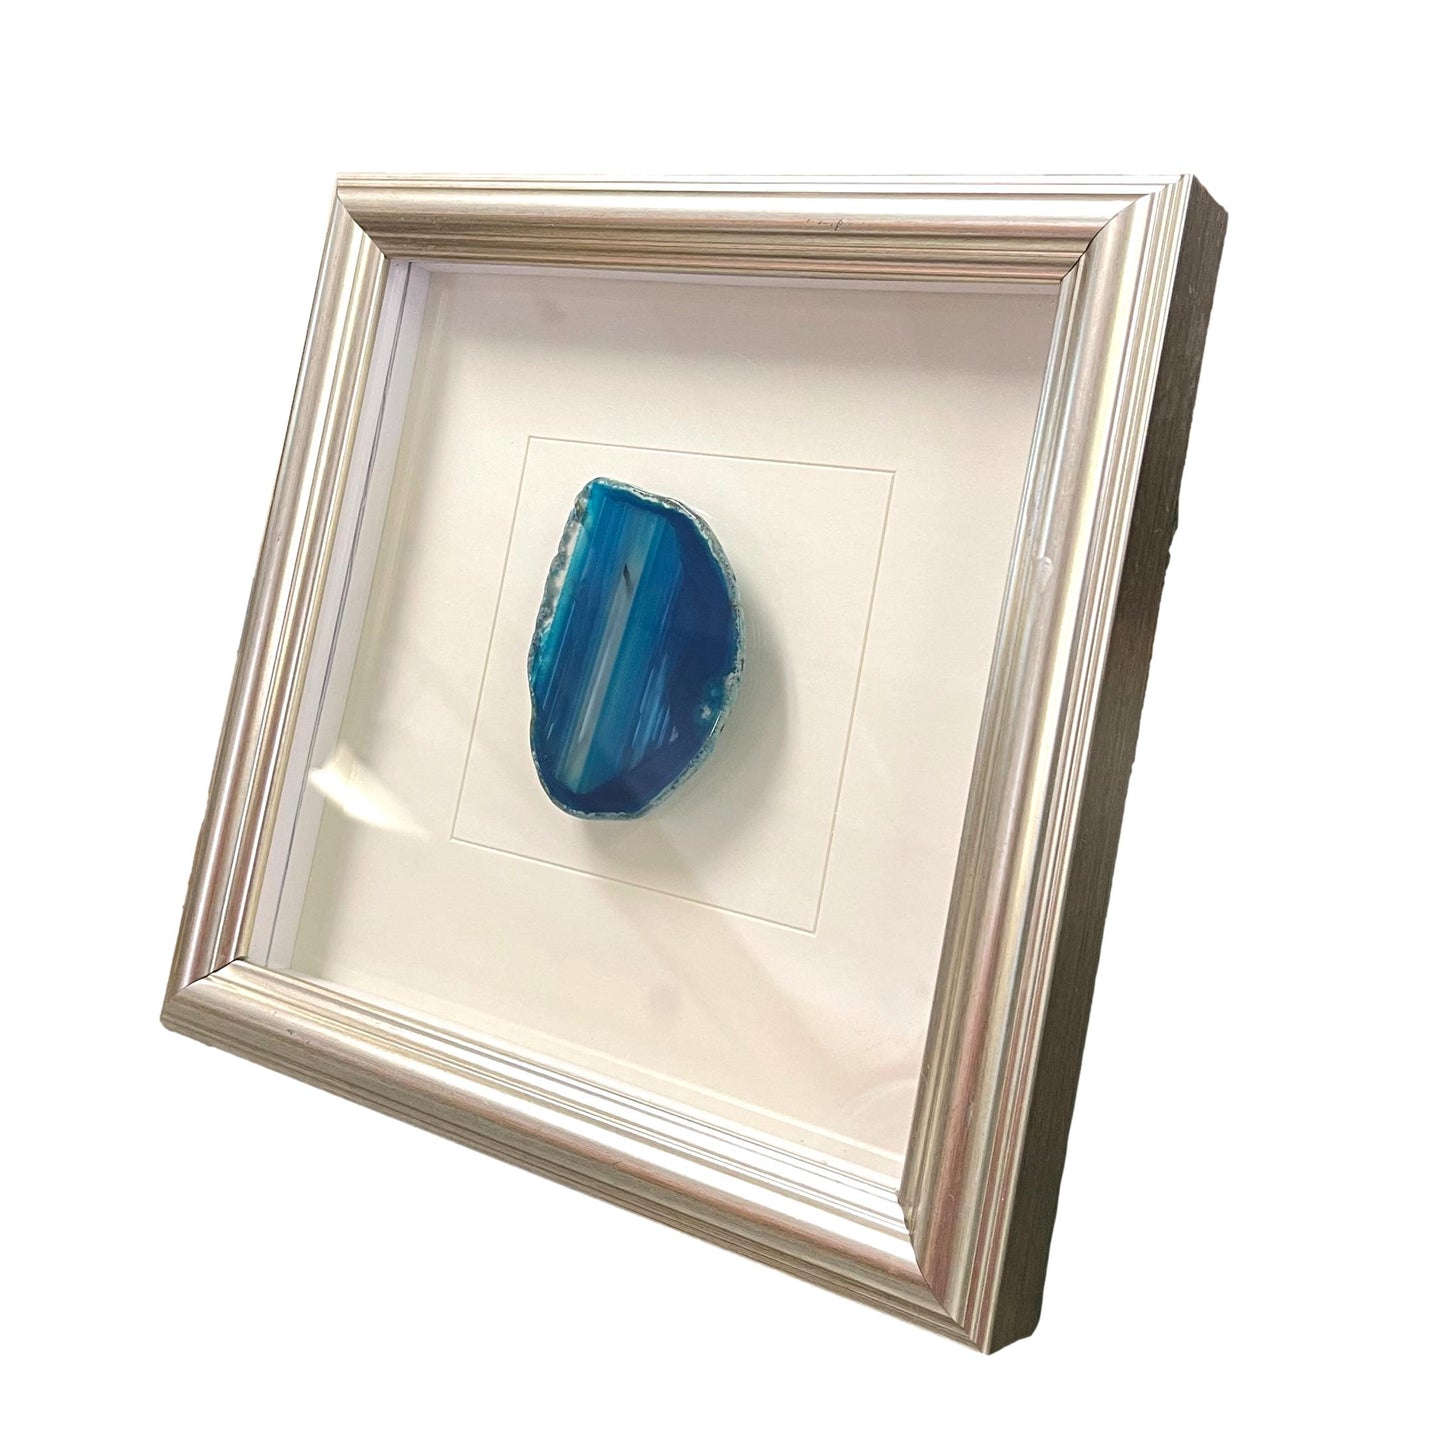 Blue Ocean Mineral Stone In Frame